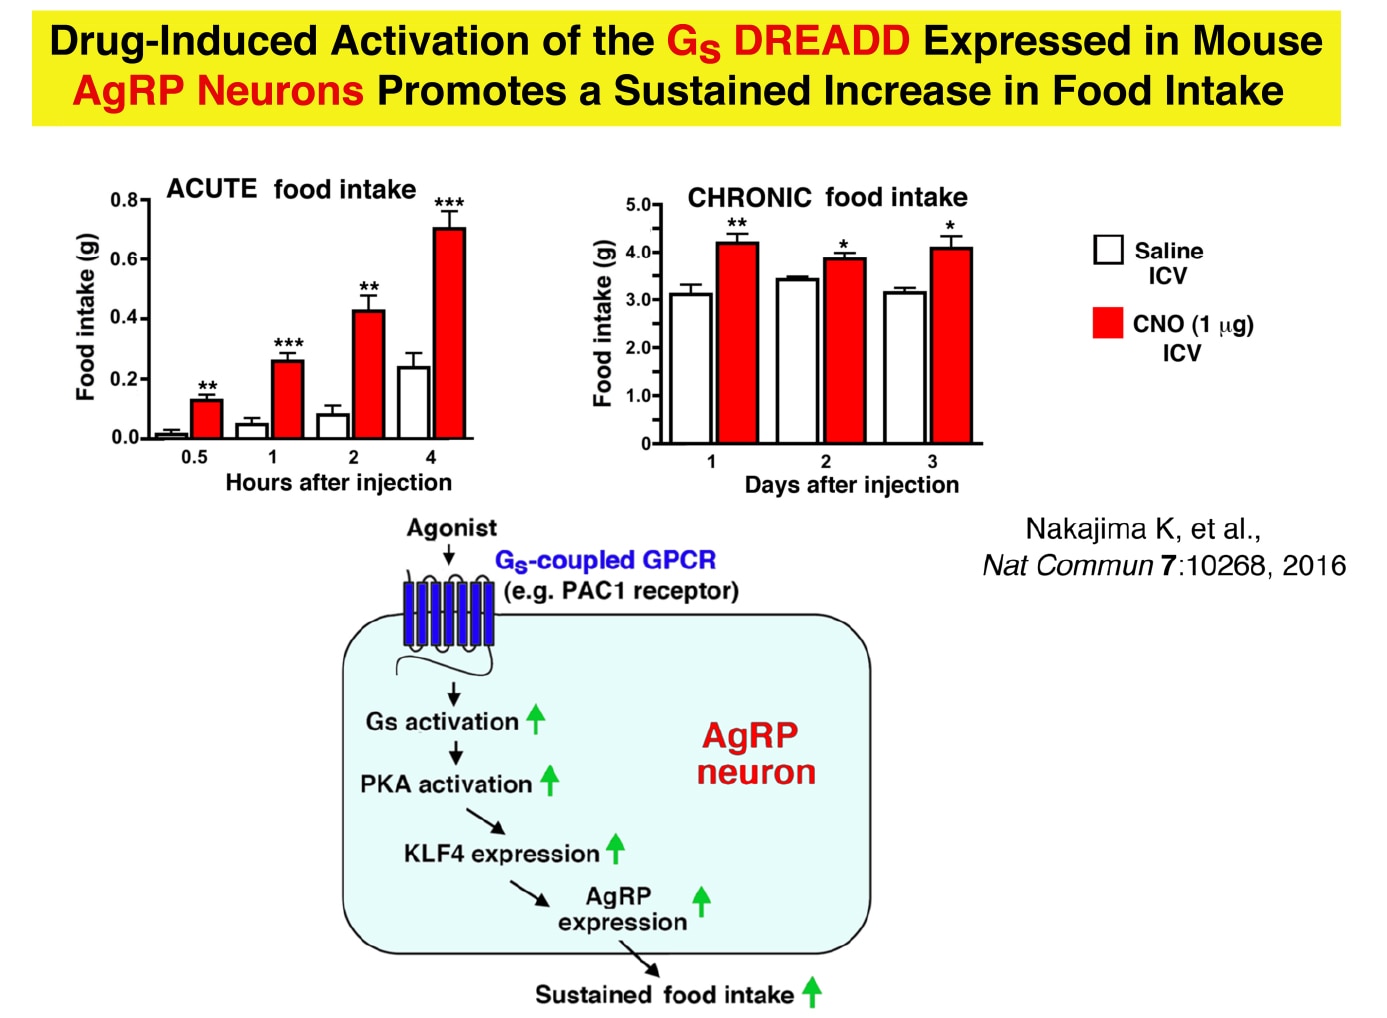 Scheme summarizing how activation of Gs signaling in AgRP neurons promotes food intake in mice.